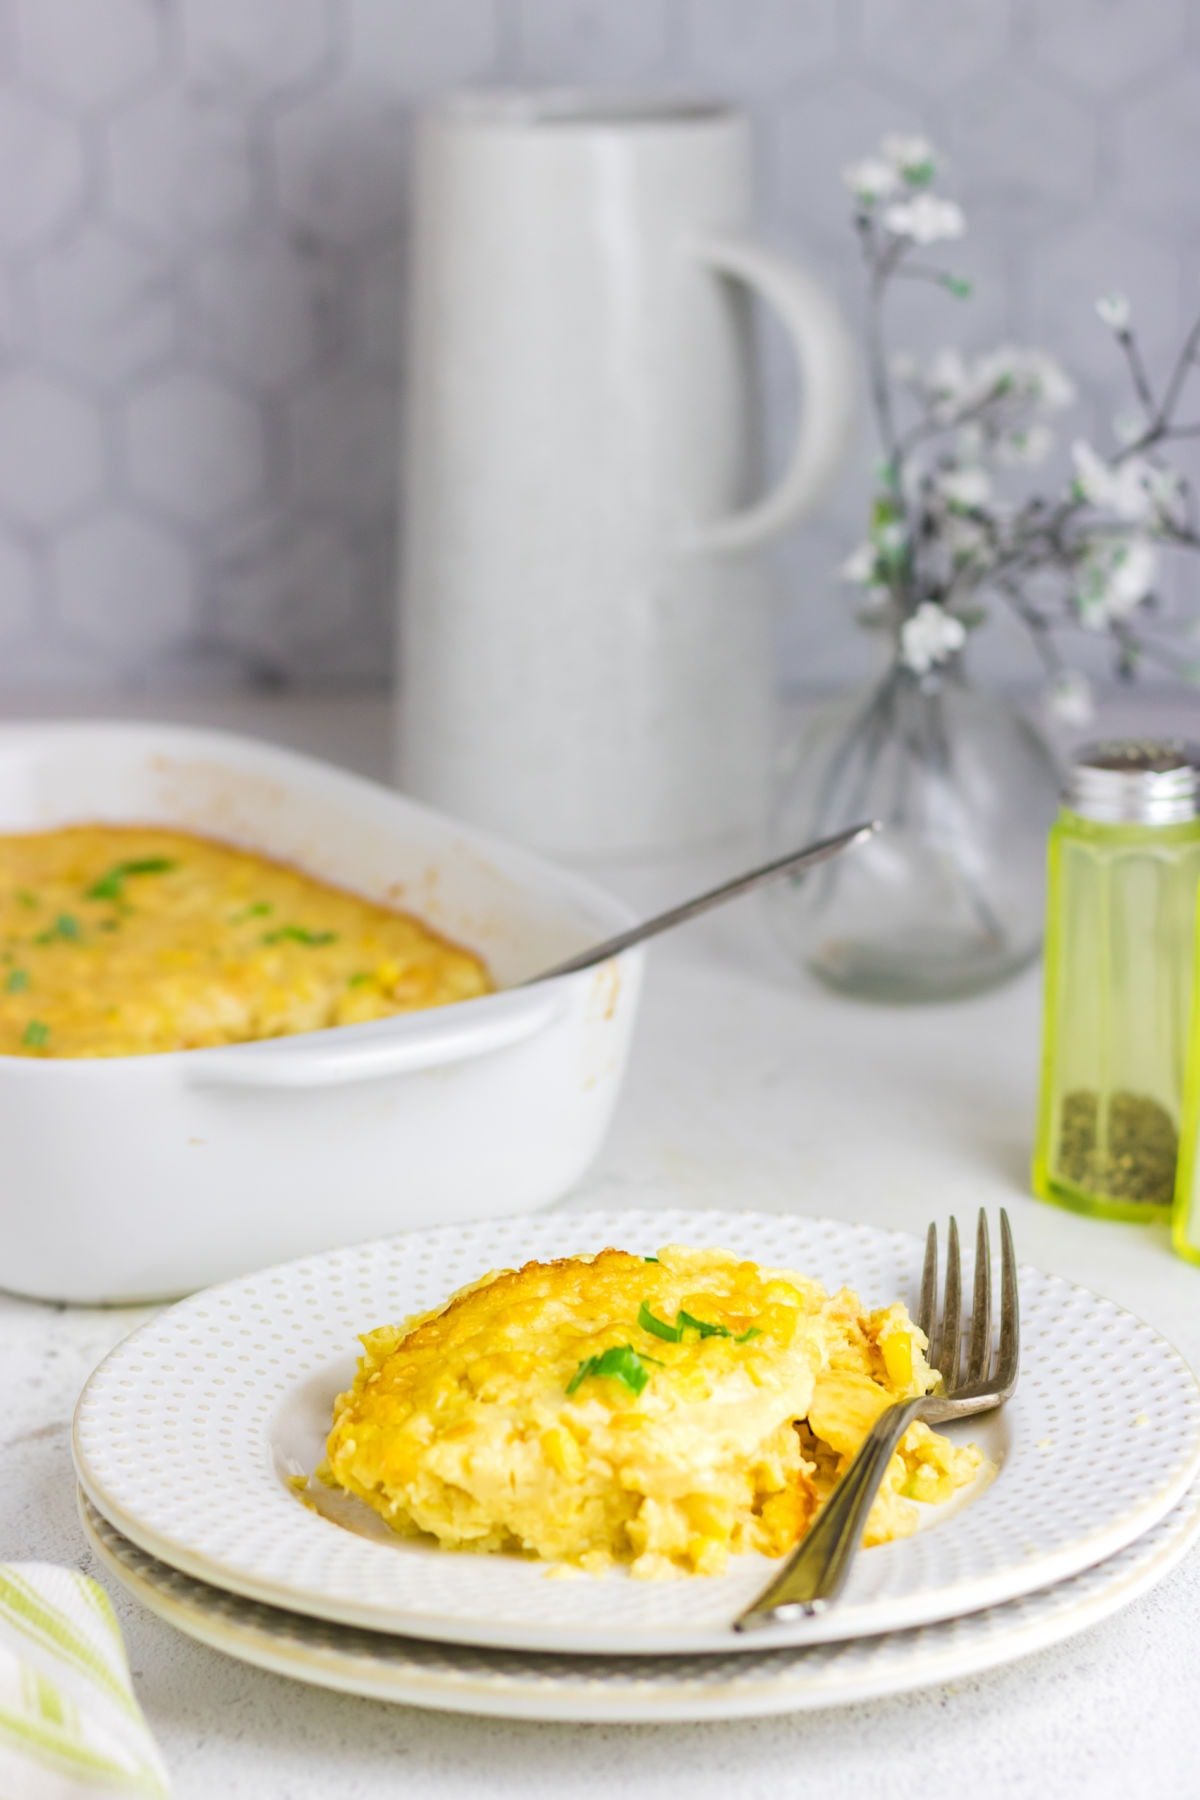 Corn pudding served up on a plate on a table that's been set for dinner.